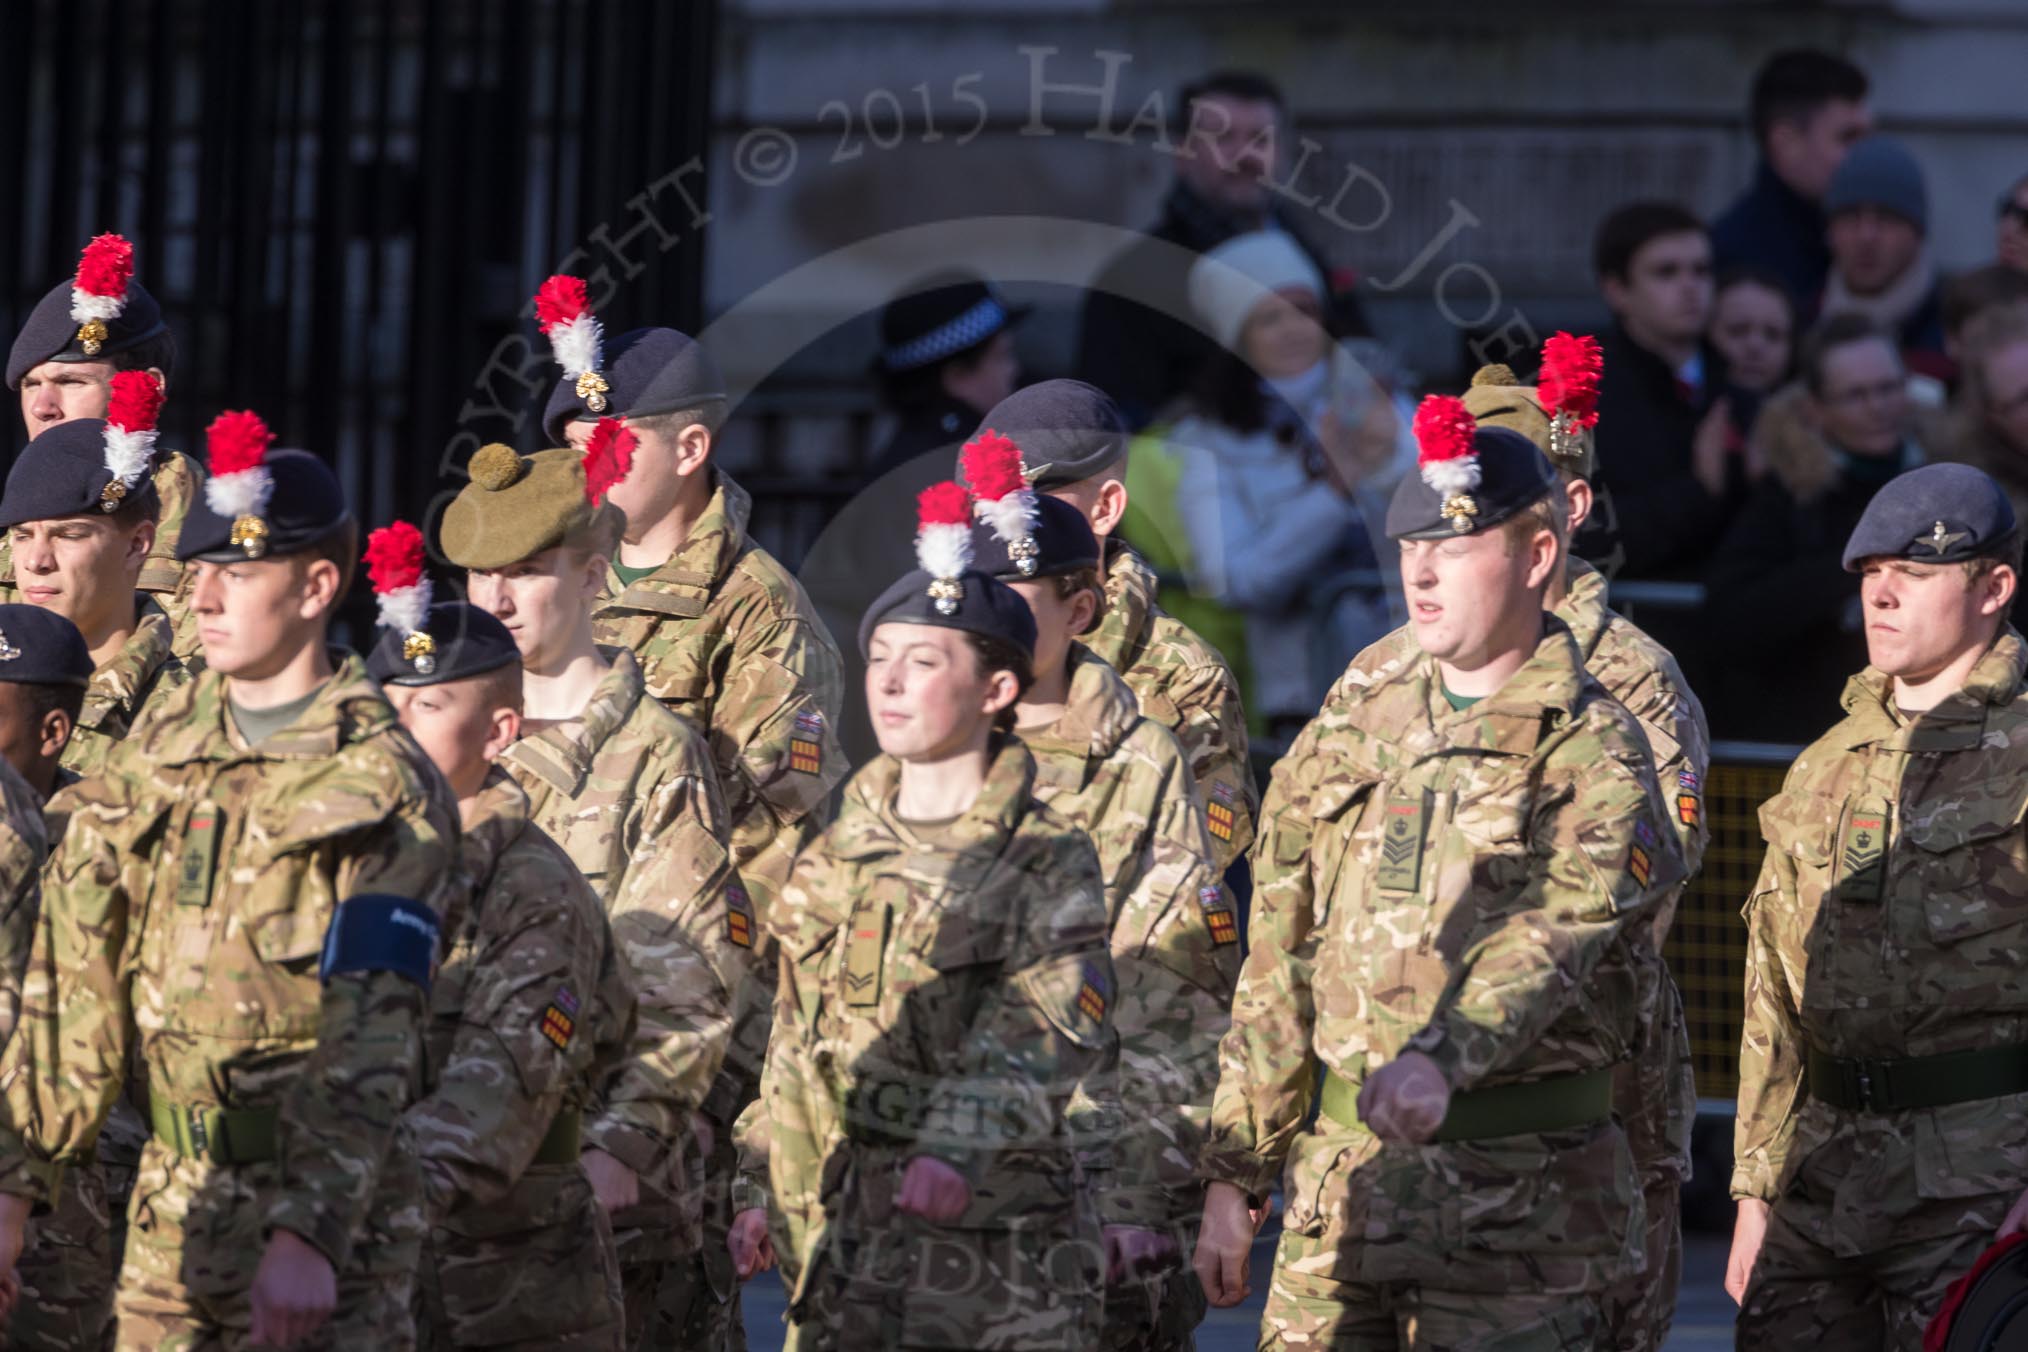 March Past, Remembrance Sunday at the Cenotaph 2016: M32 Army and combined Cadet Force.
Cenotaph, Whitehall, London SW1,
London,
Greater London,
United Kingdom,
on 13 November 2016 at 13:18, image #2812